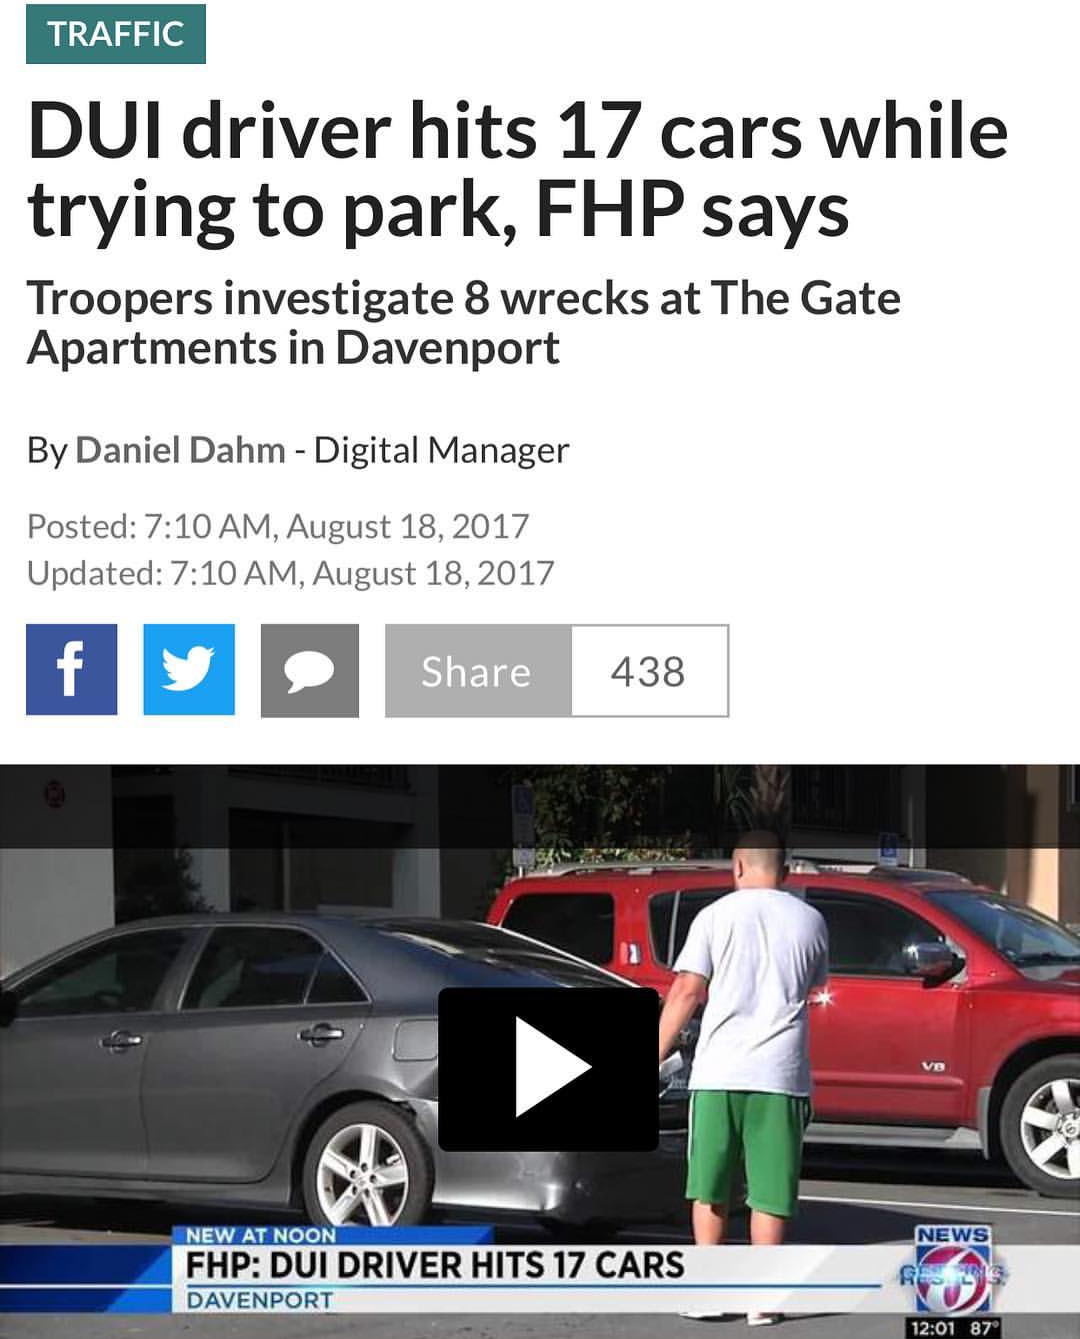 mounting systems - Traffic Dui driver hits 17 cars while trying to park, Fhp says Troopers investigate 8 wrecks at The Gate Apartments in Davenport By Daniel Dahm Digital Manager Posted , Updated , fV 438 438 Vb News New At Noon Fhp Dui Driver Hits 17 Car